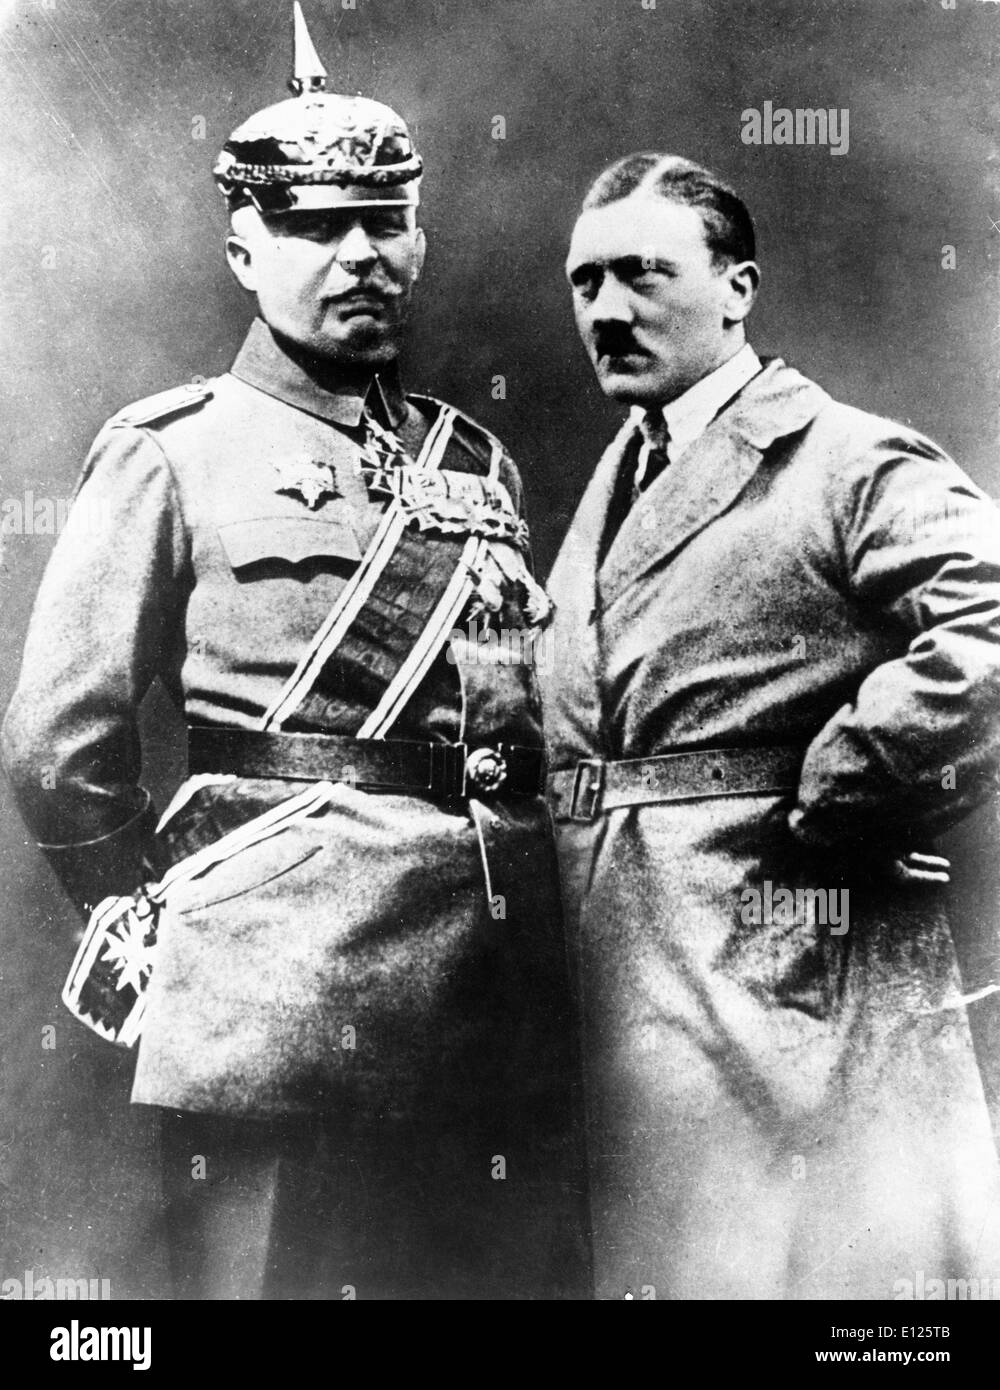 Jan 25, 2005; Berlin, GERMANY; (File Photo. Date Unknown) ADOLF HITLER (R) and ERICH LUDENDORFF..  u Stock Photo